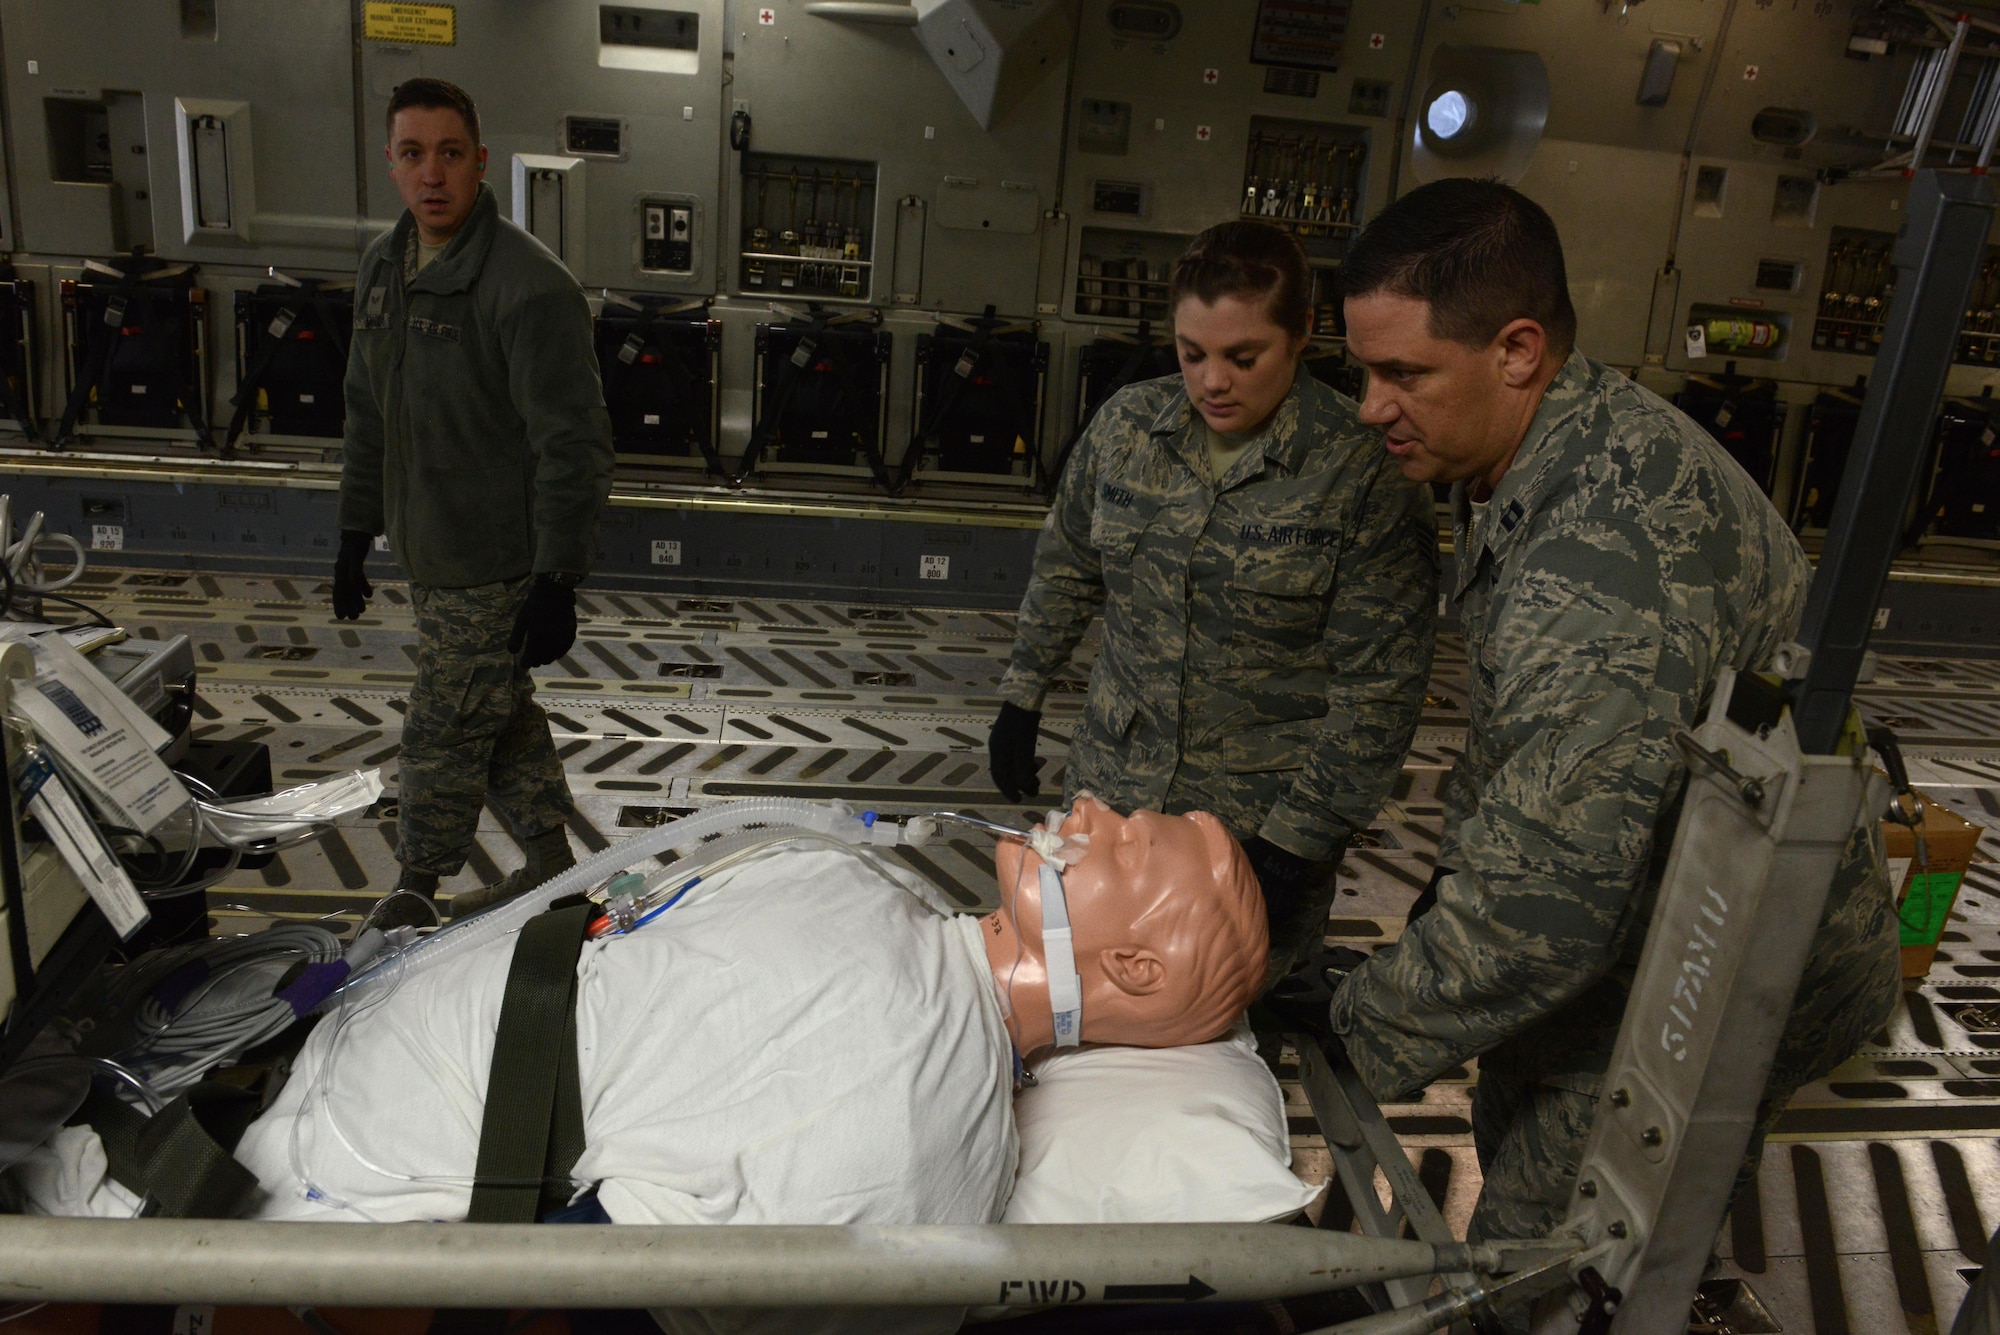 U.S. Air Force Capt. Paul Padilla (right) and Staff Sgt. Tiffany Smith (center) secure a simulated patient in a C-17 Globemaster III during the EnRoute Patient Staging System exercise at Joint Base Elmendorf-Richardson, Alaska, April 3, 2017. The ERPSS provides patient reception and limited emergent intervention, and ensures patients are medically and administratively prepared for flight in a safe and timely aeromedical evacuation. 